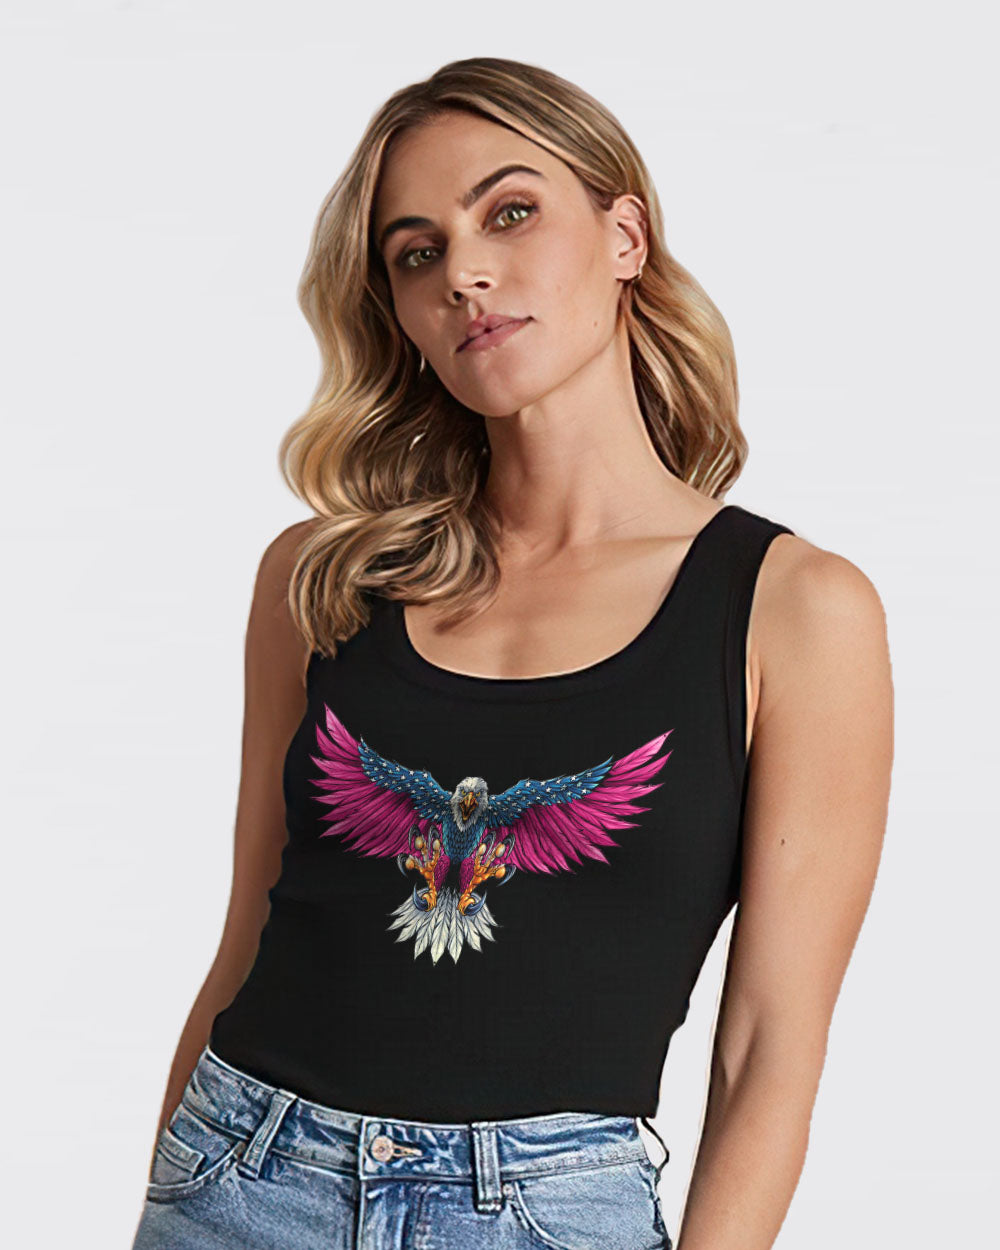 Be Stronger Than The Storm Eagle With Flag Women's Breast Cancer Awareness Tanks